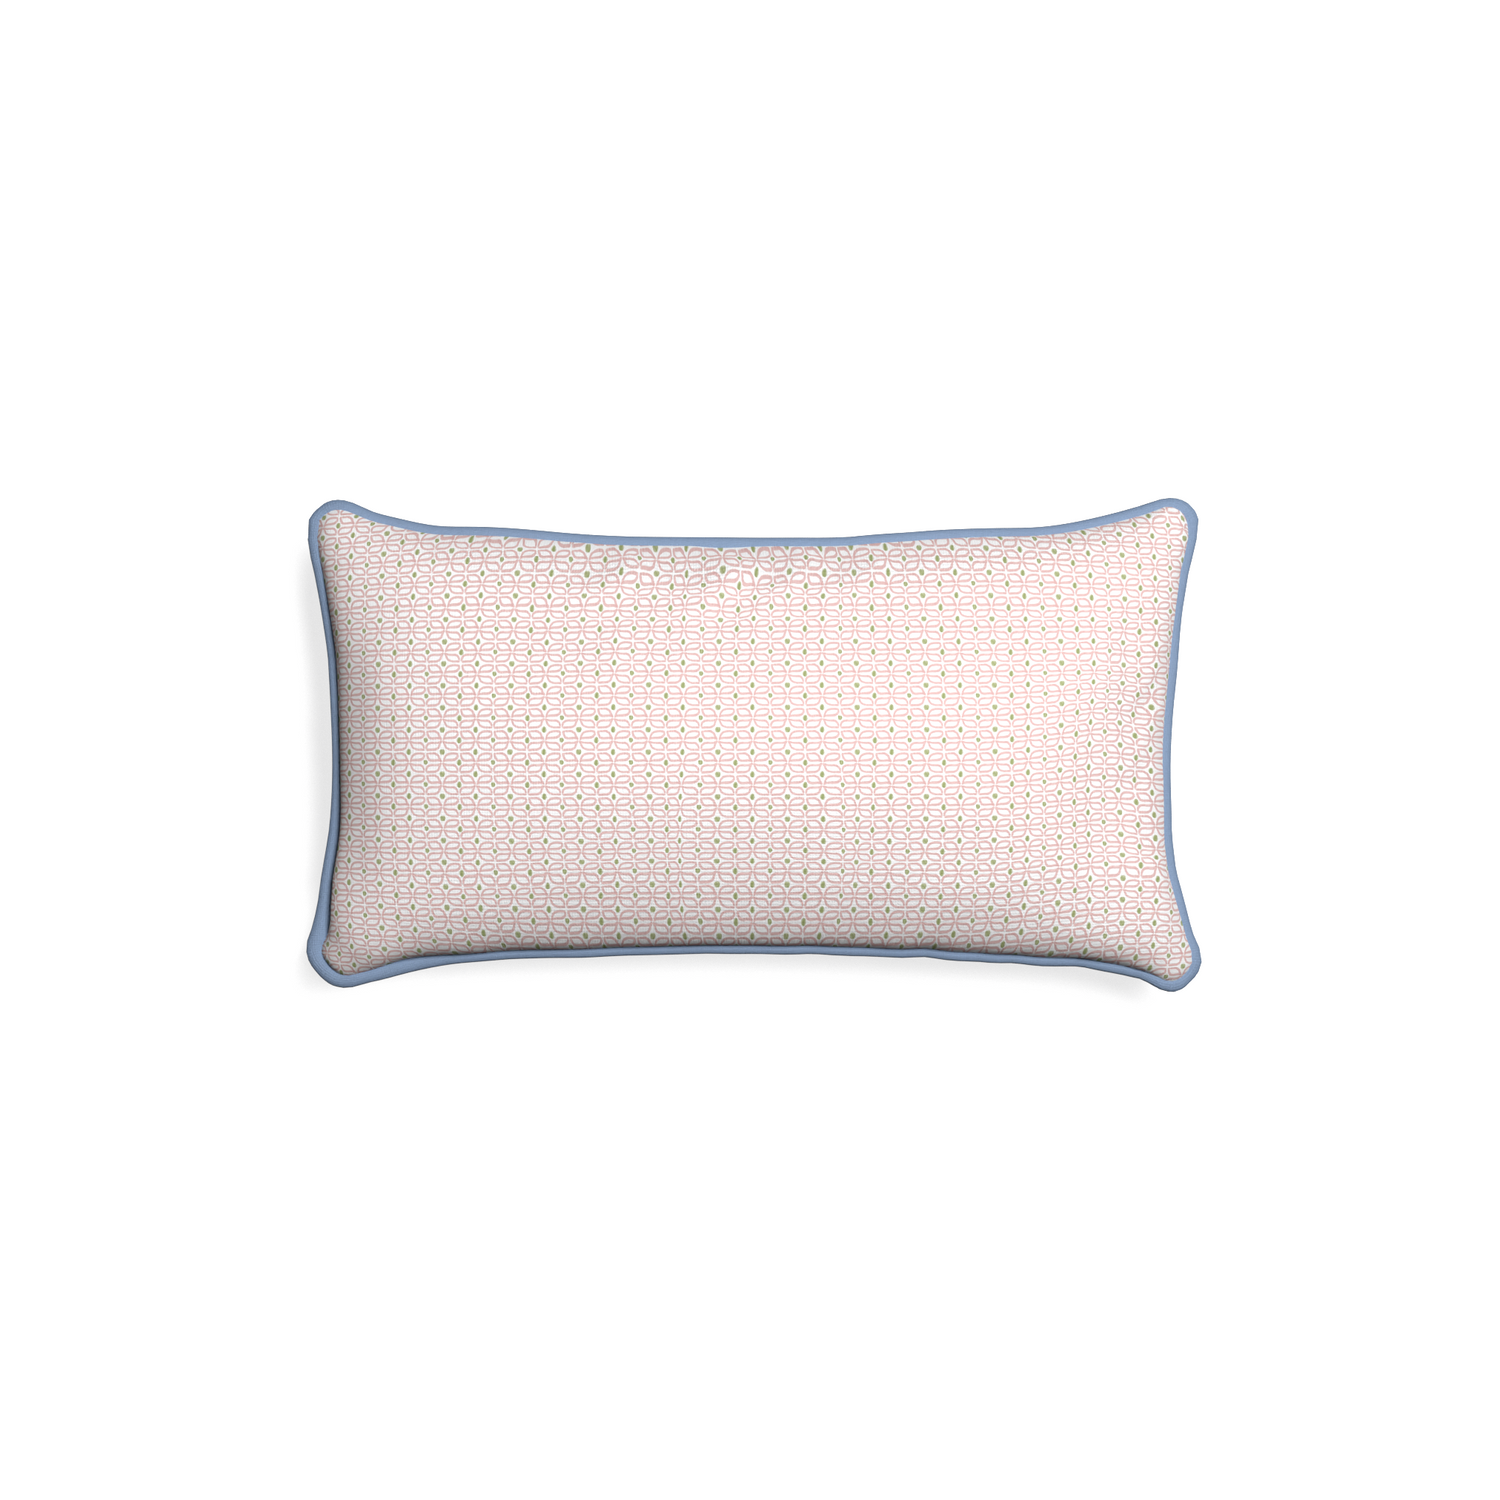 Petite-lumbar loomi pink custom pink geometricpillow with sky piping on white background